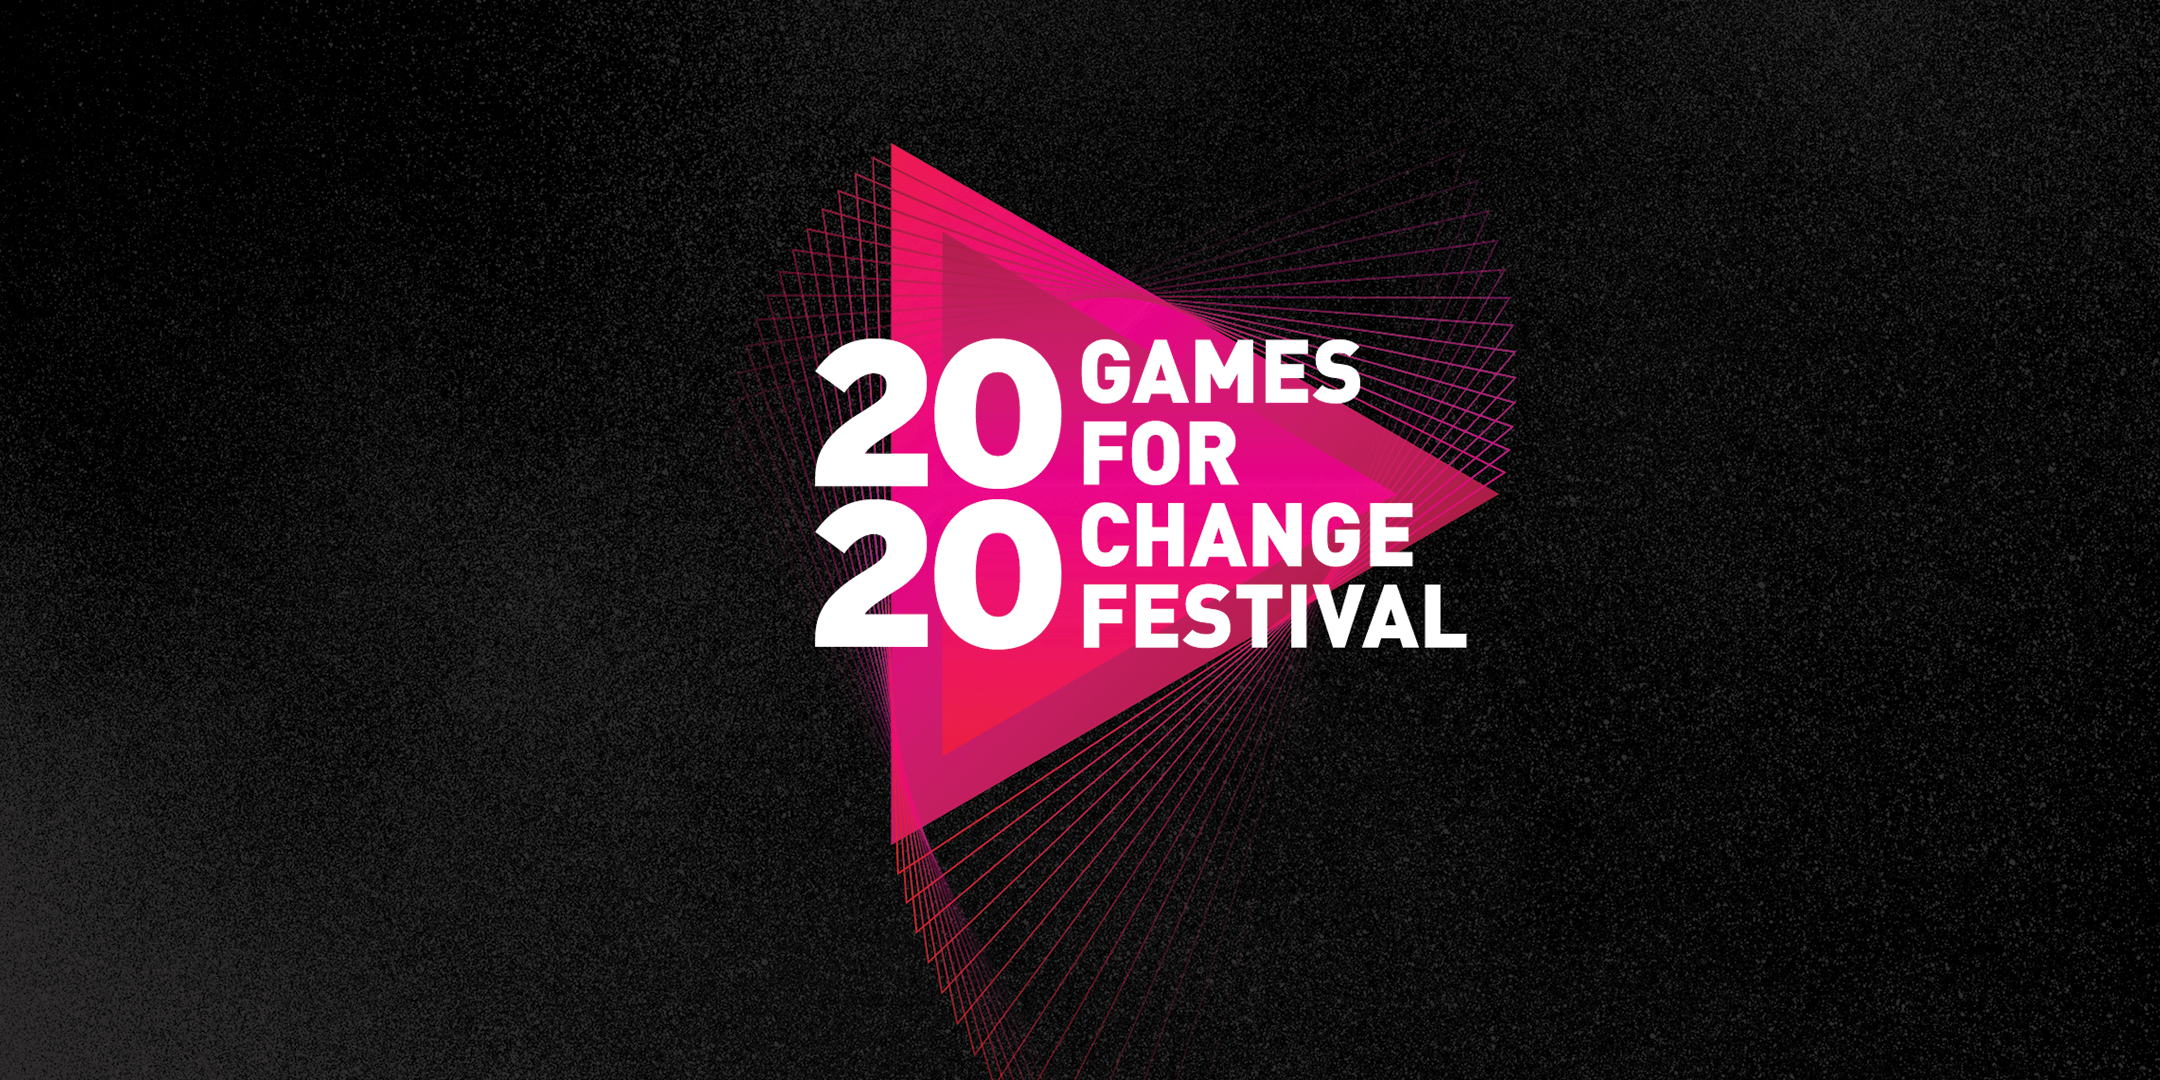 The 2020 Games for Change Festival